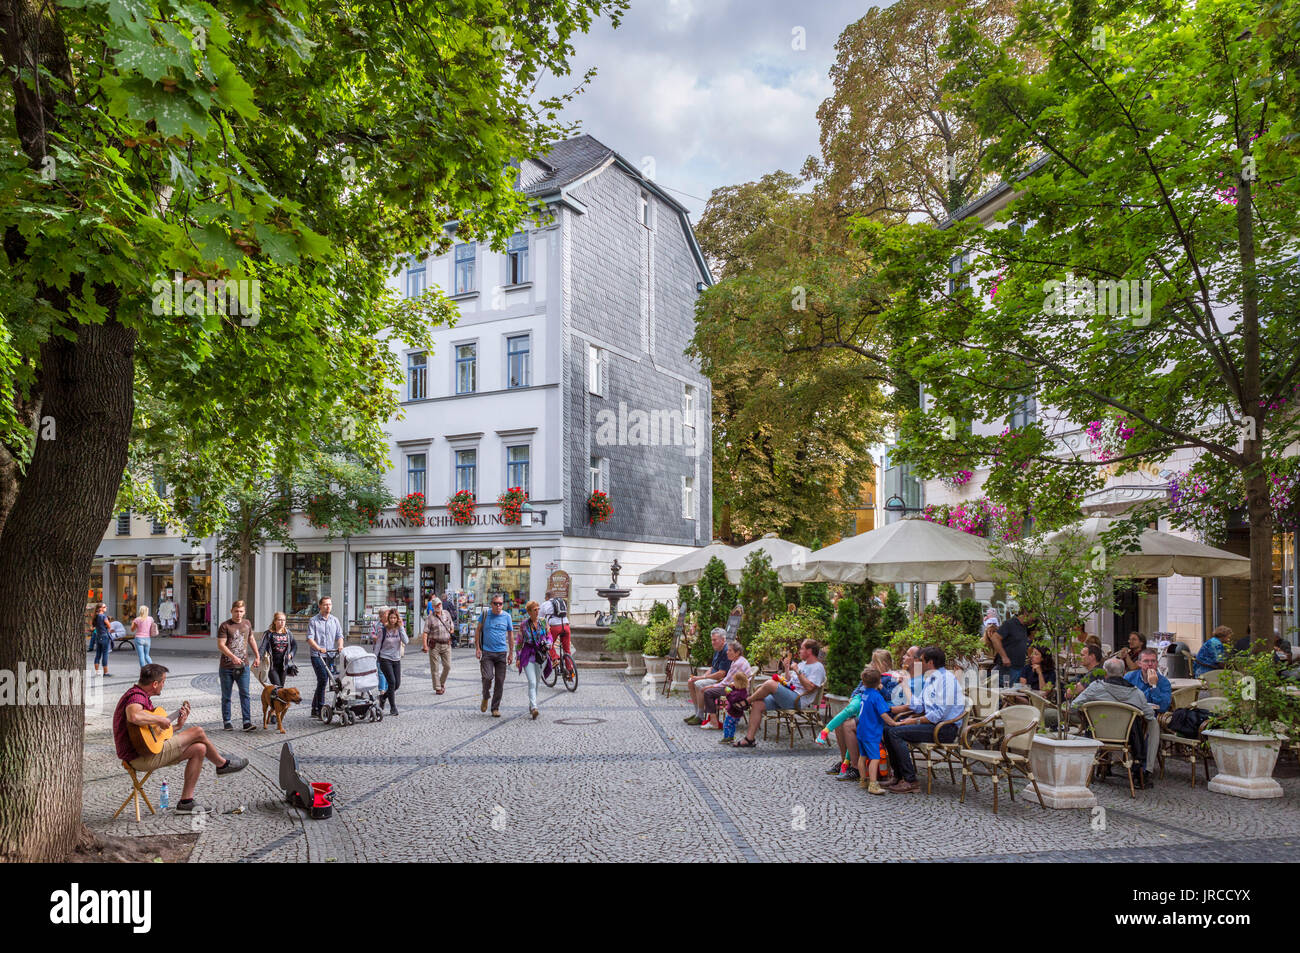 Cafe on Schillerstrasse in the old town, Weimar, Thuringia, Germany Stock Photo